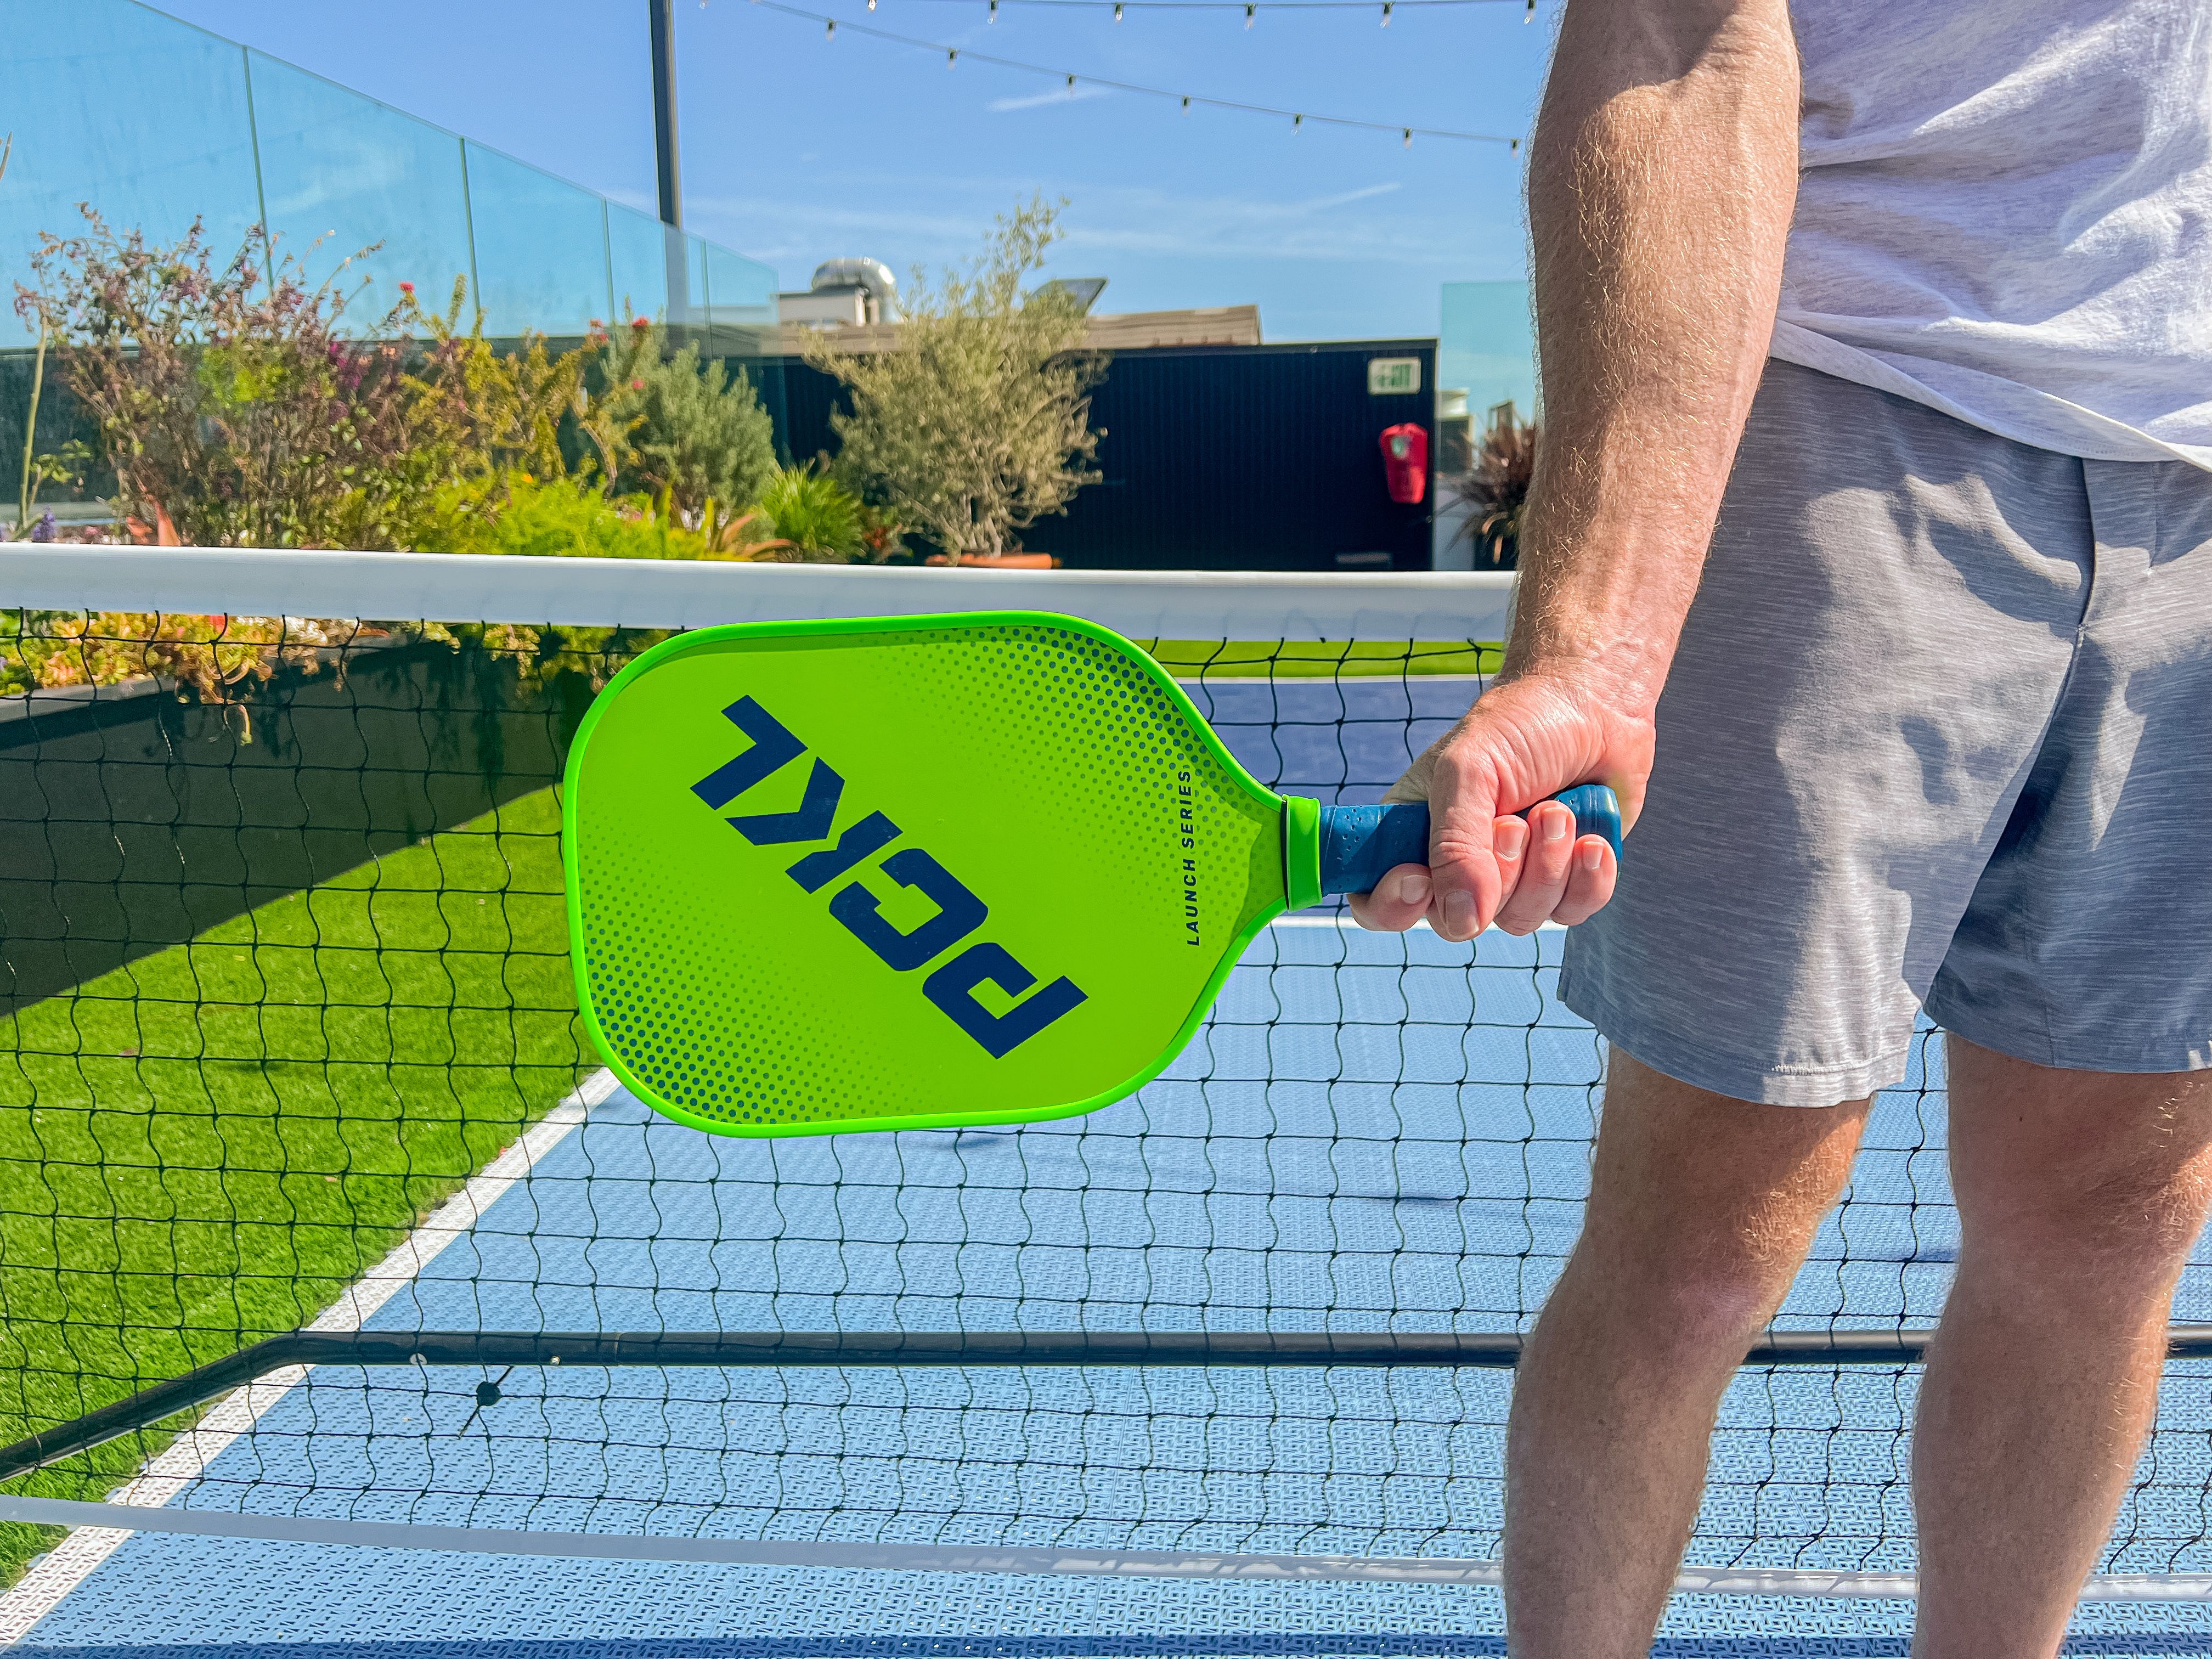 Brandon Mackie demonstrates a grip on the PCKL Launch Series pickleball paddle